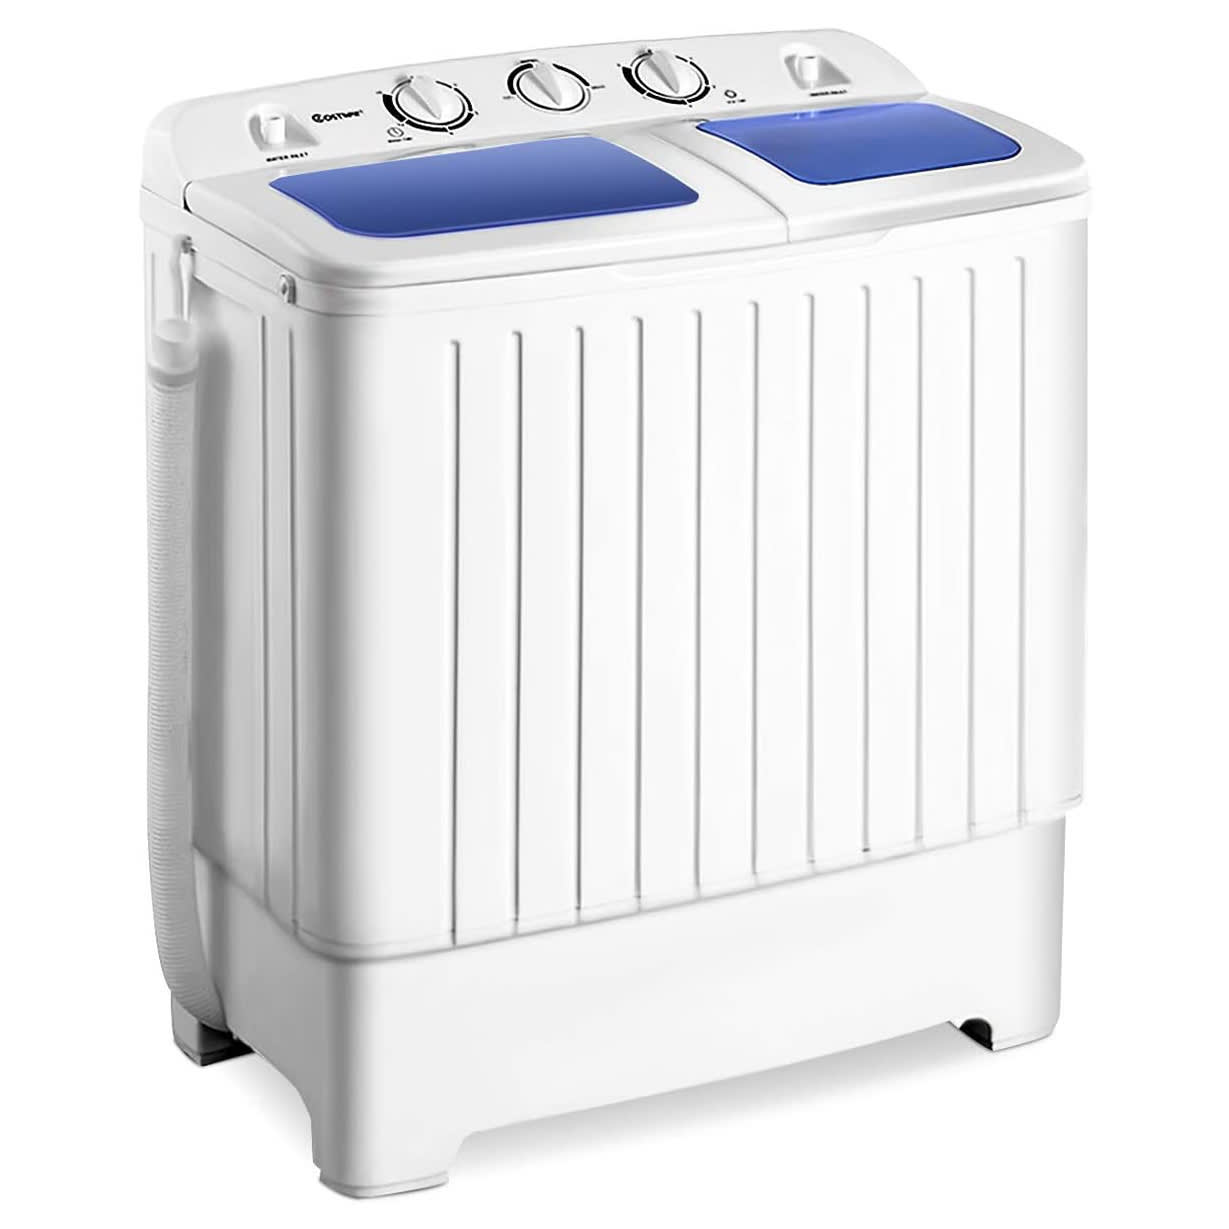 These portable washing machines make small living spaces more manageable